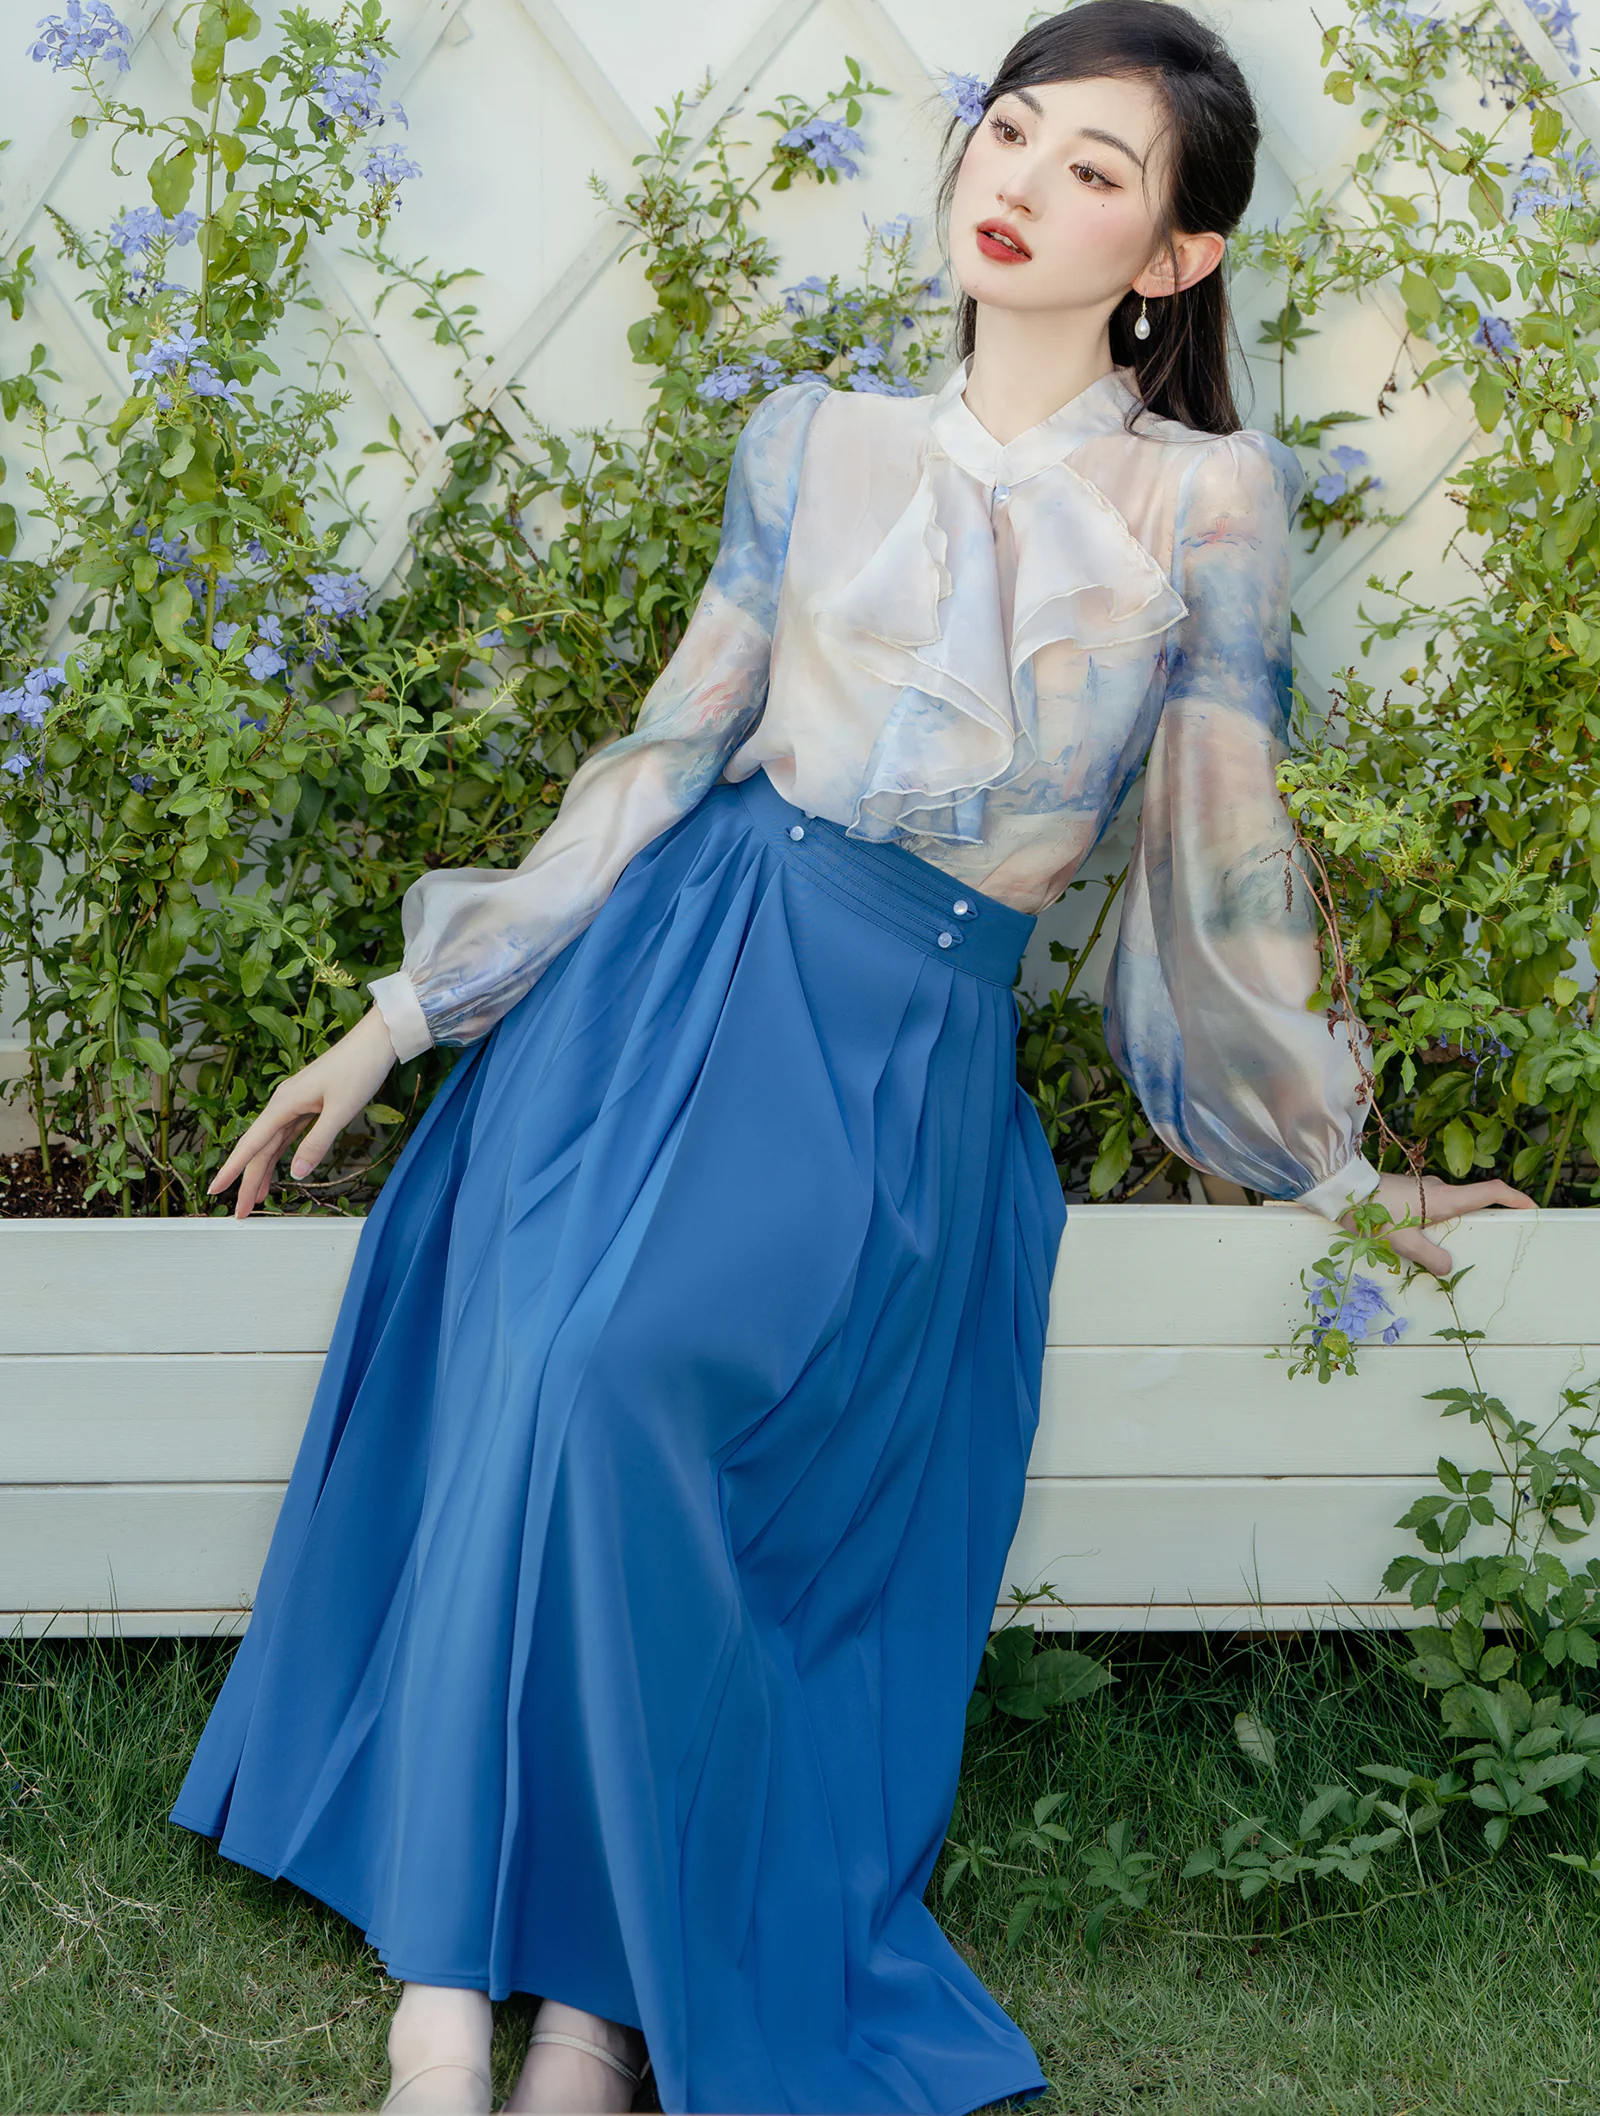 Romantic French Style Oil Painting Top with Blue Skirt Casual Outfit Suit03